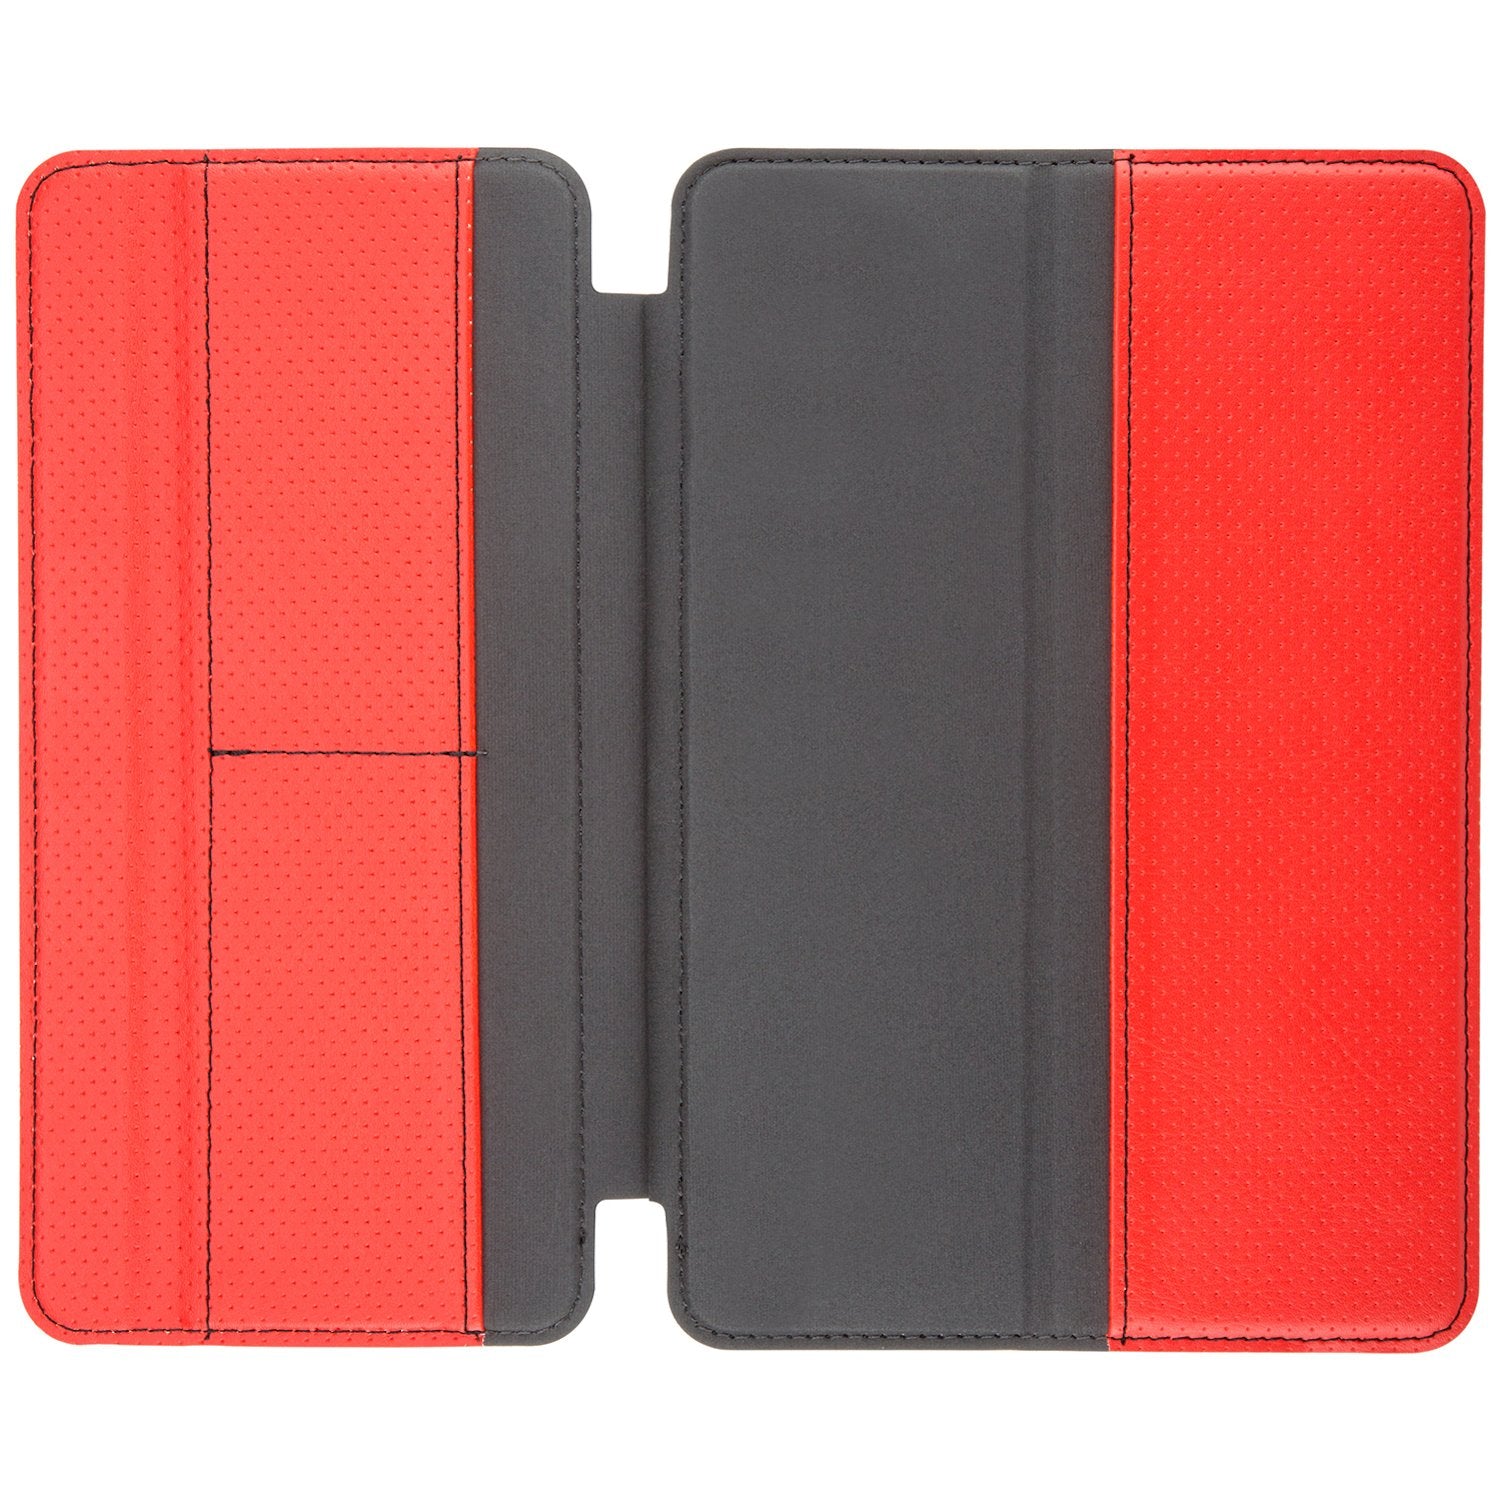 Speck Products Venture Wallet Cover for iPad Mini (SPK-A3077)  - Very Good